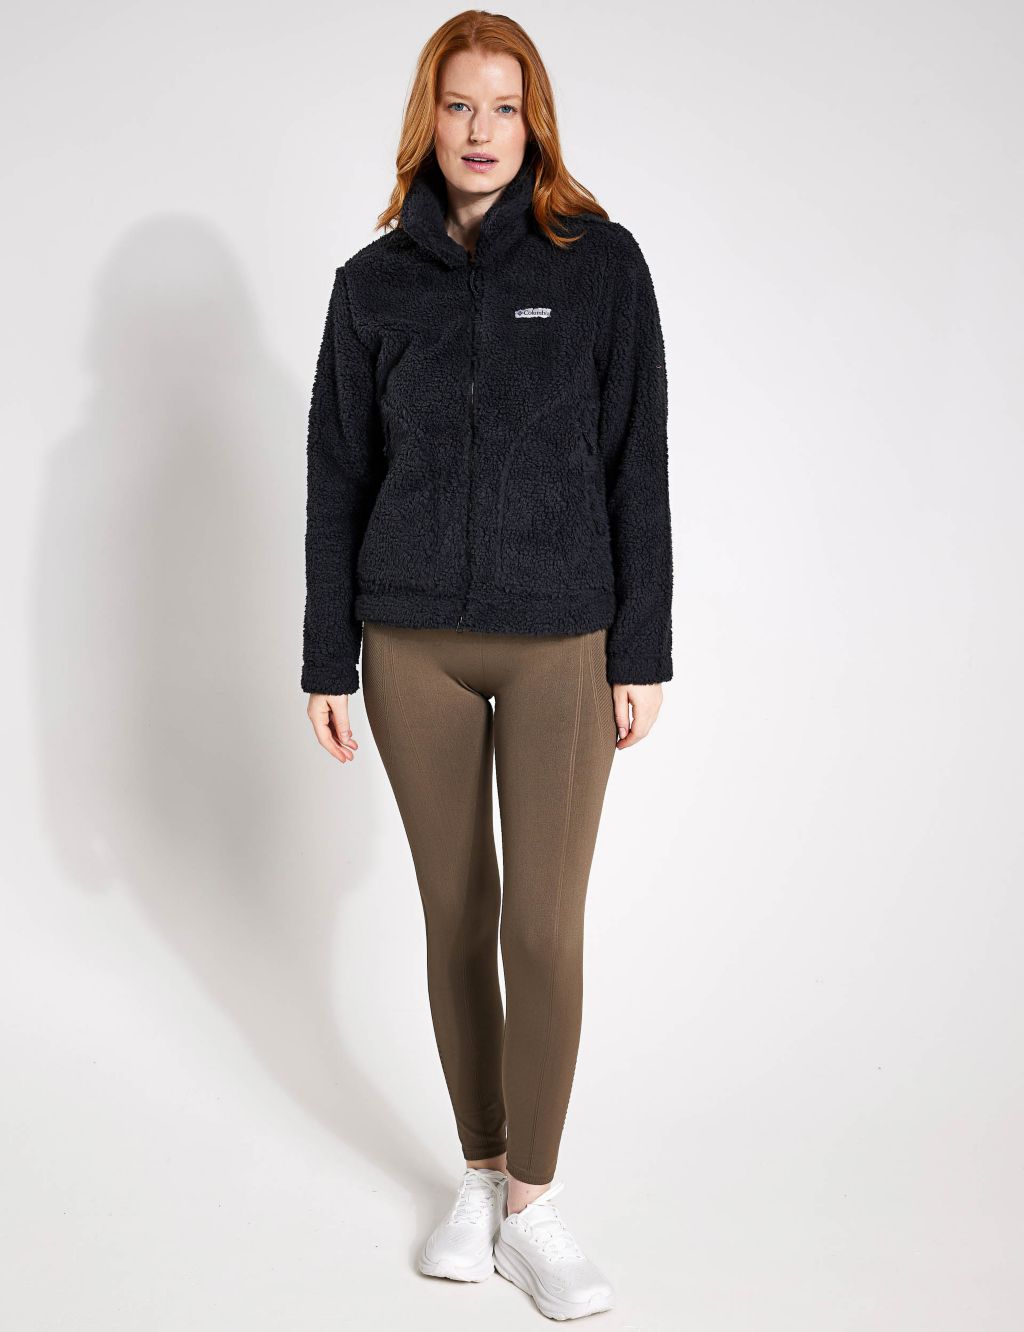 Winter Pass Funnel Neck Jacket image 2